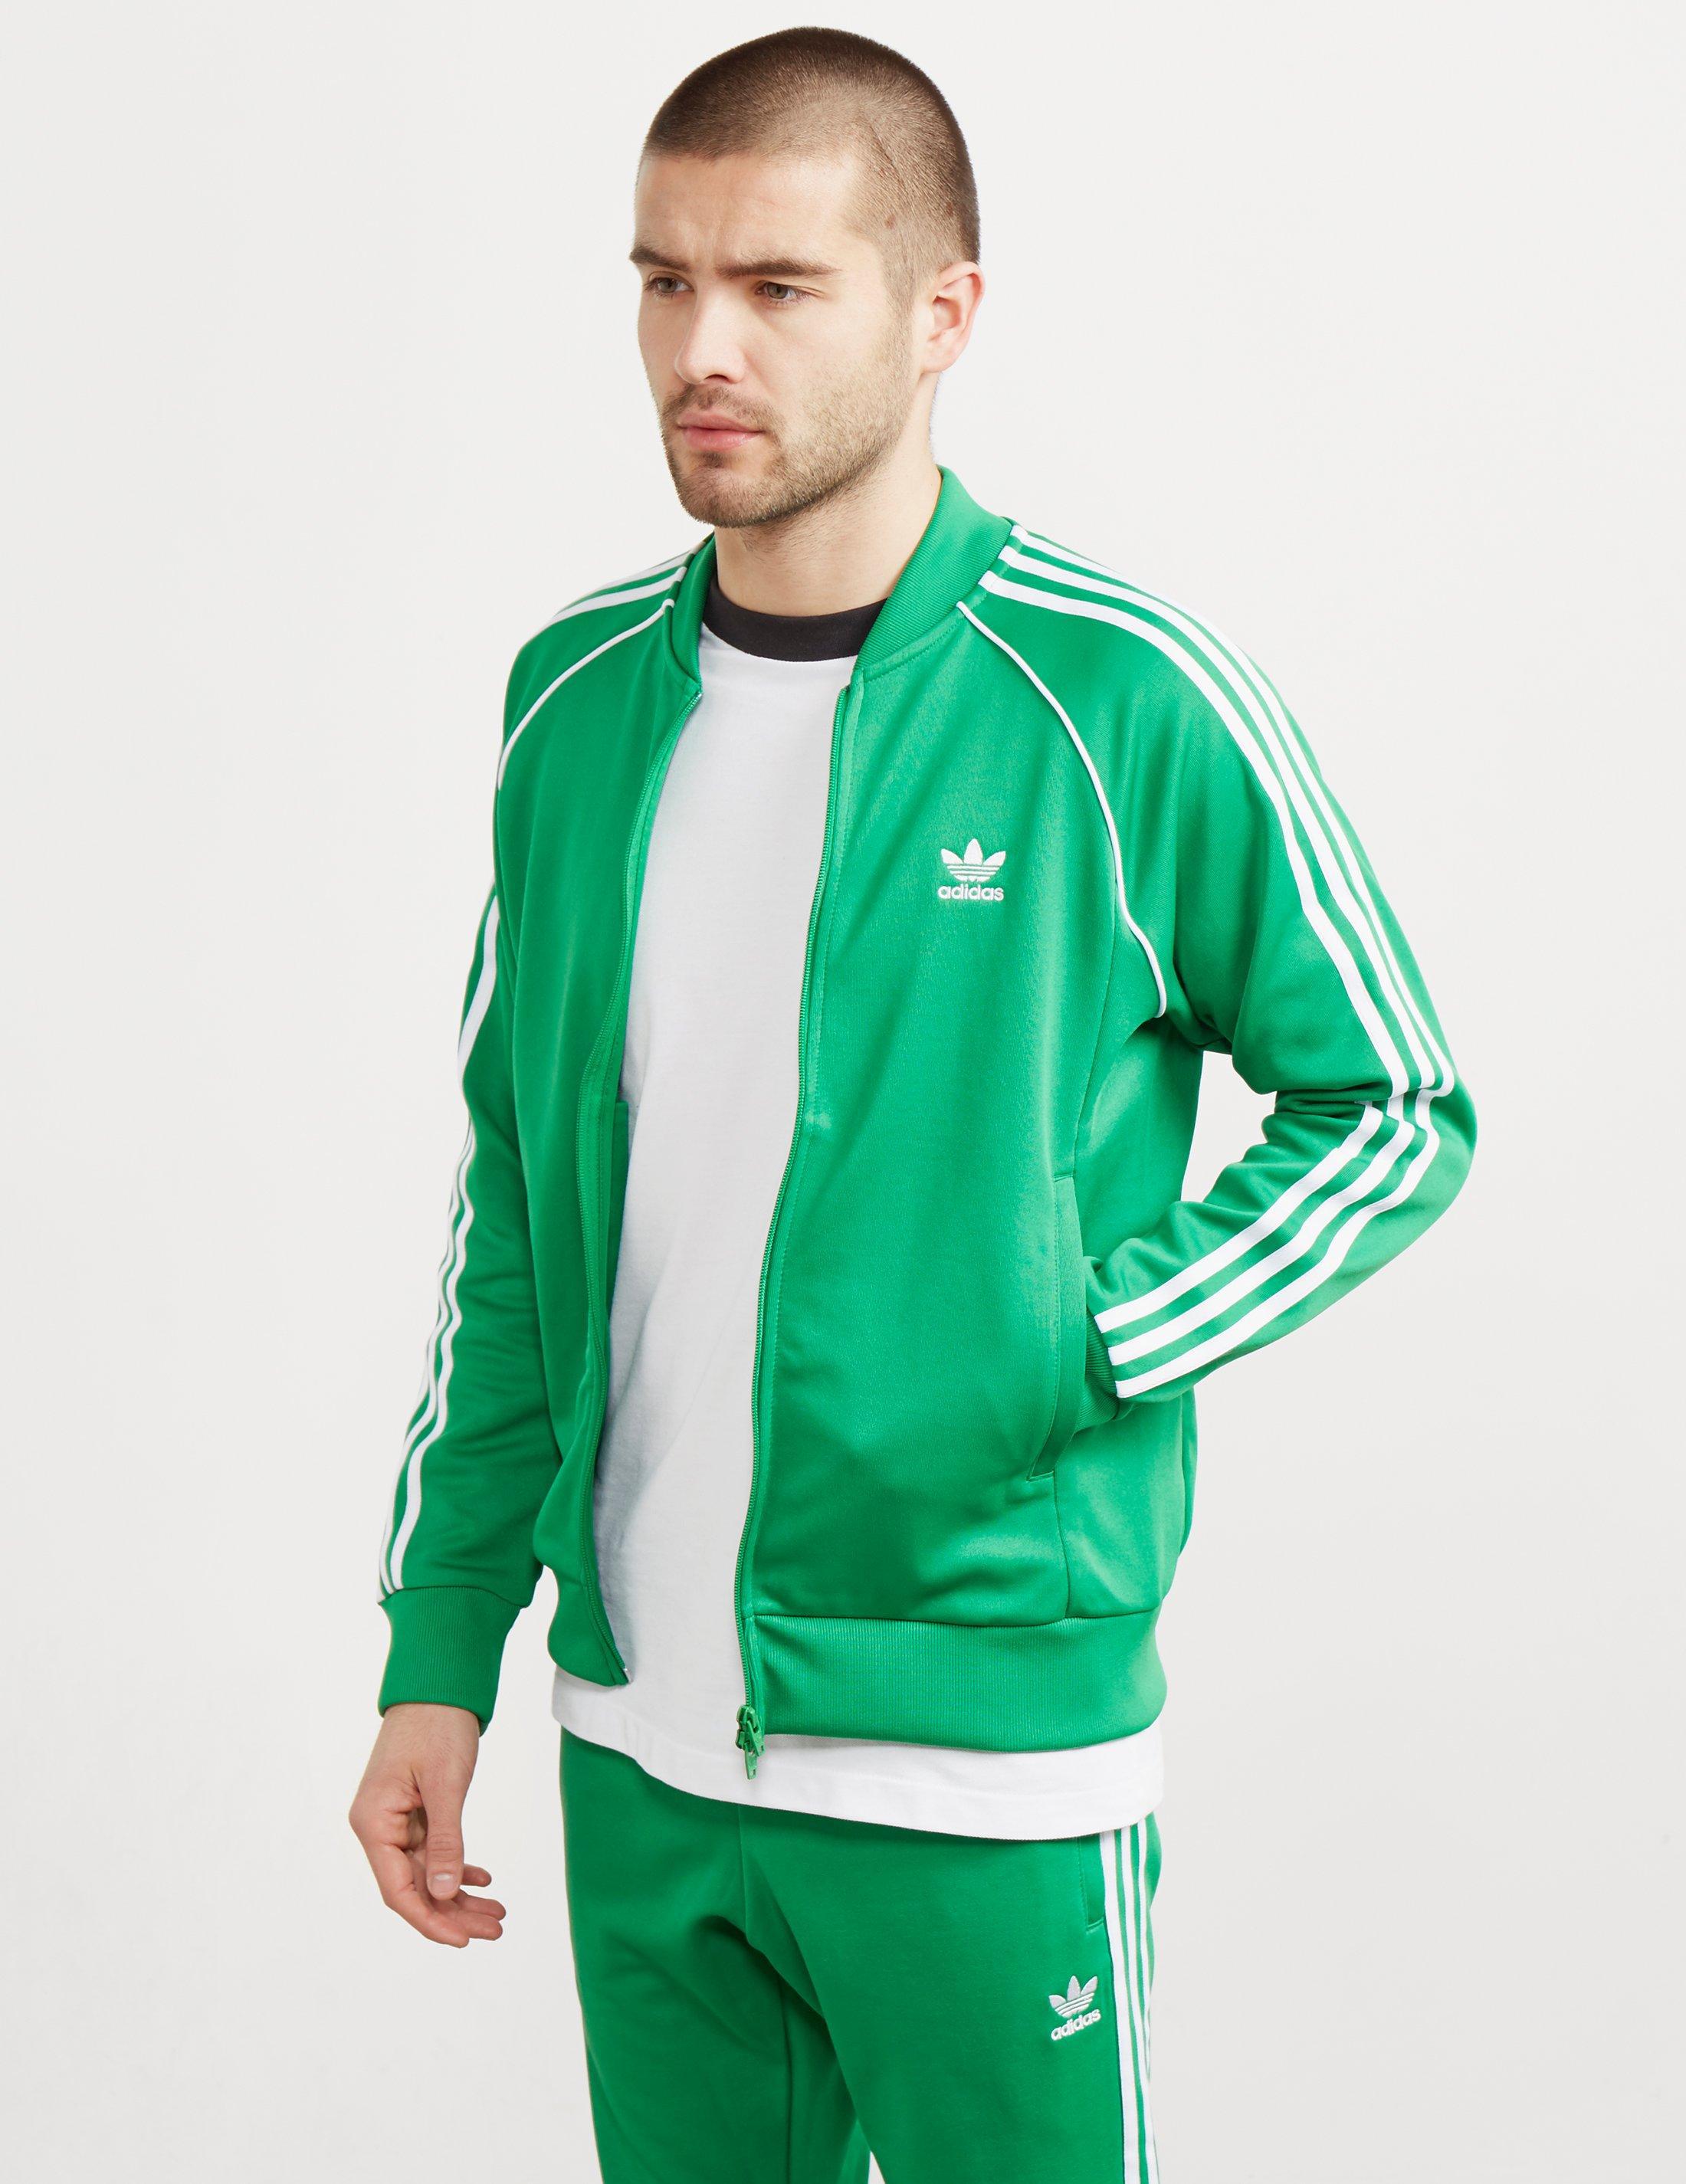 green and white adidas sweatsuit